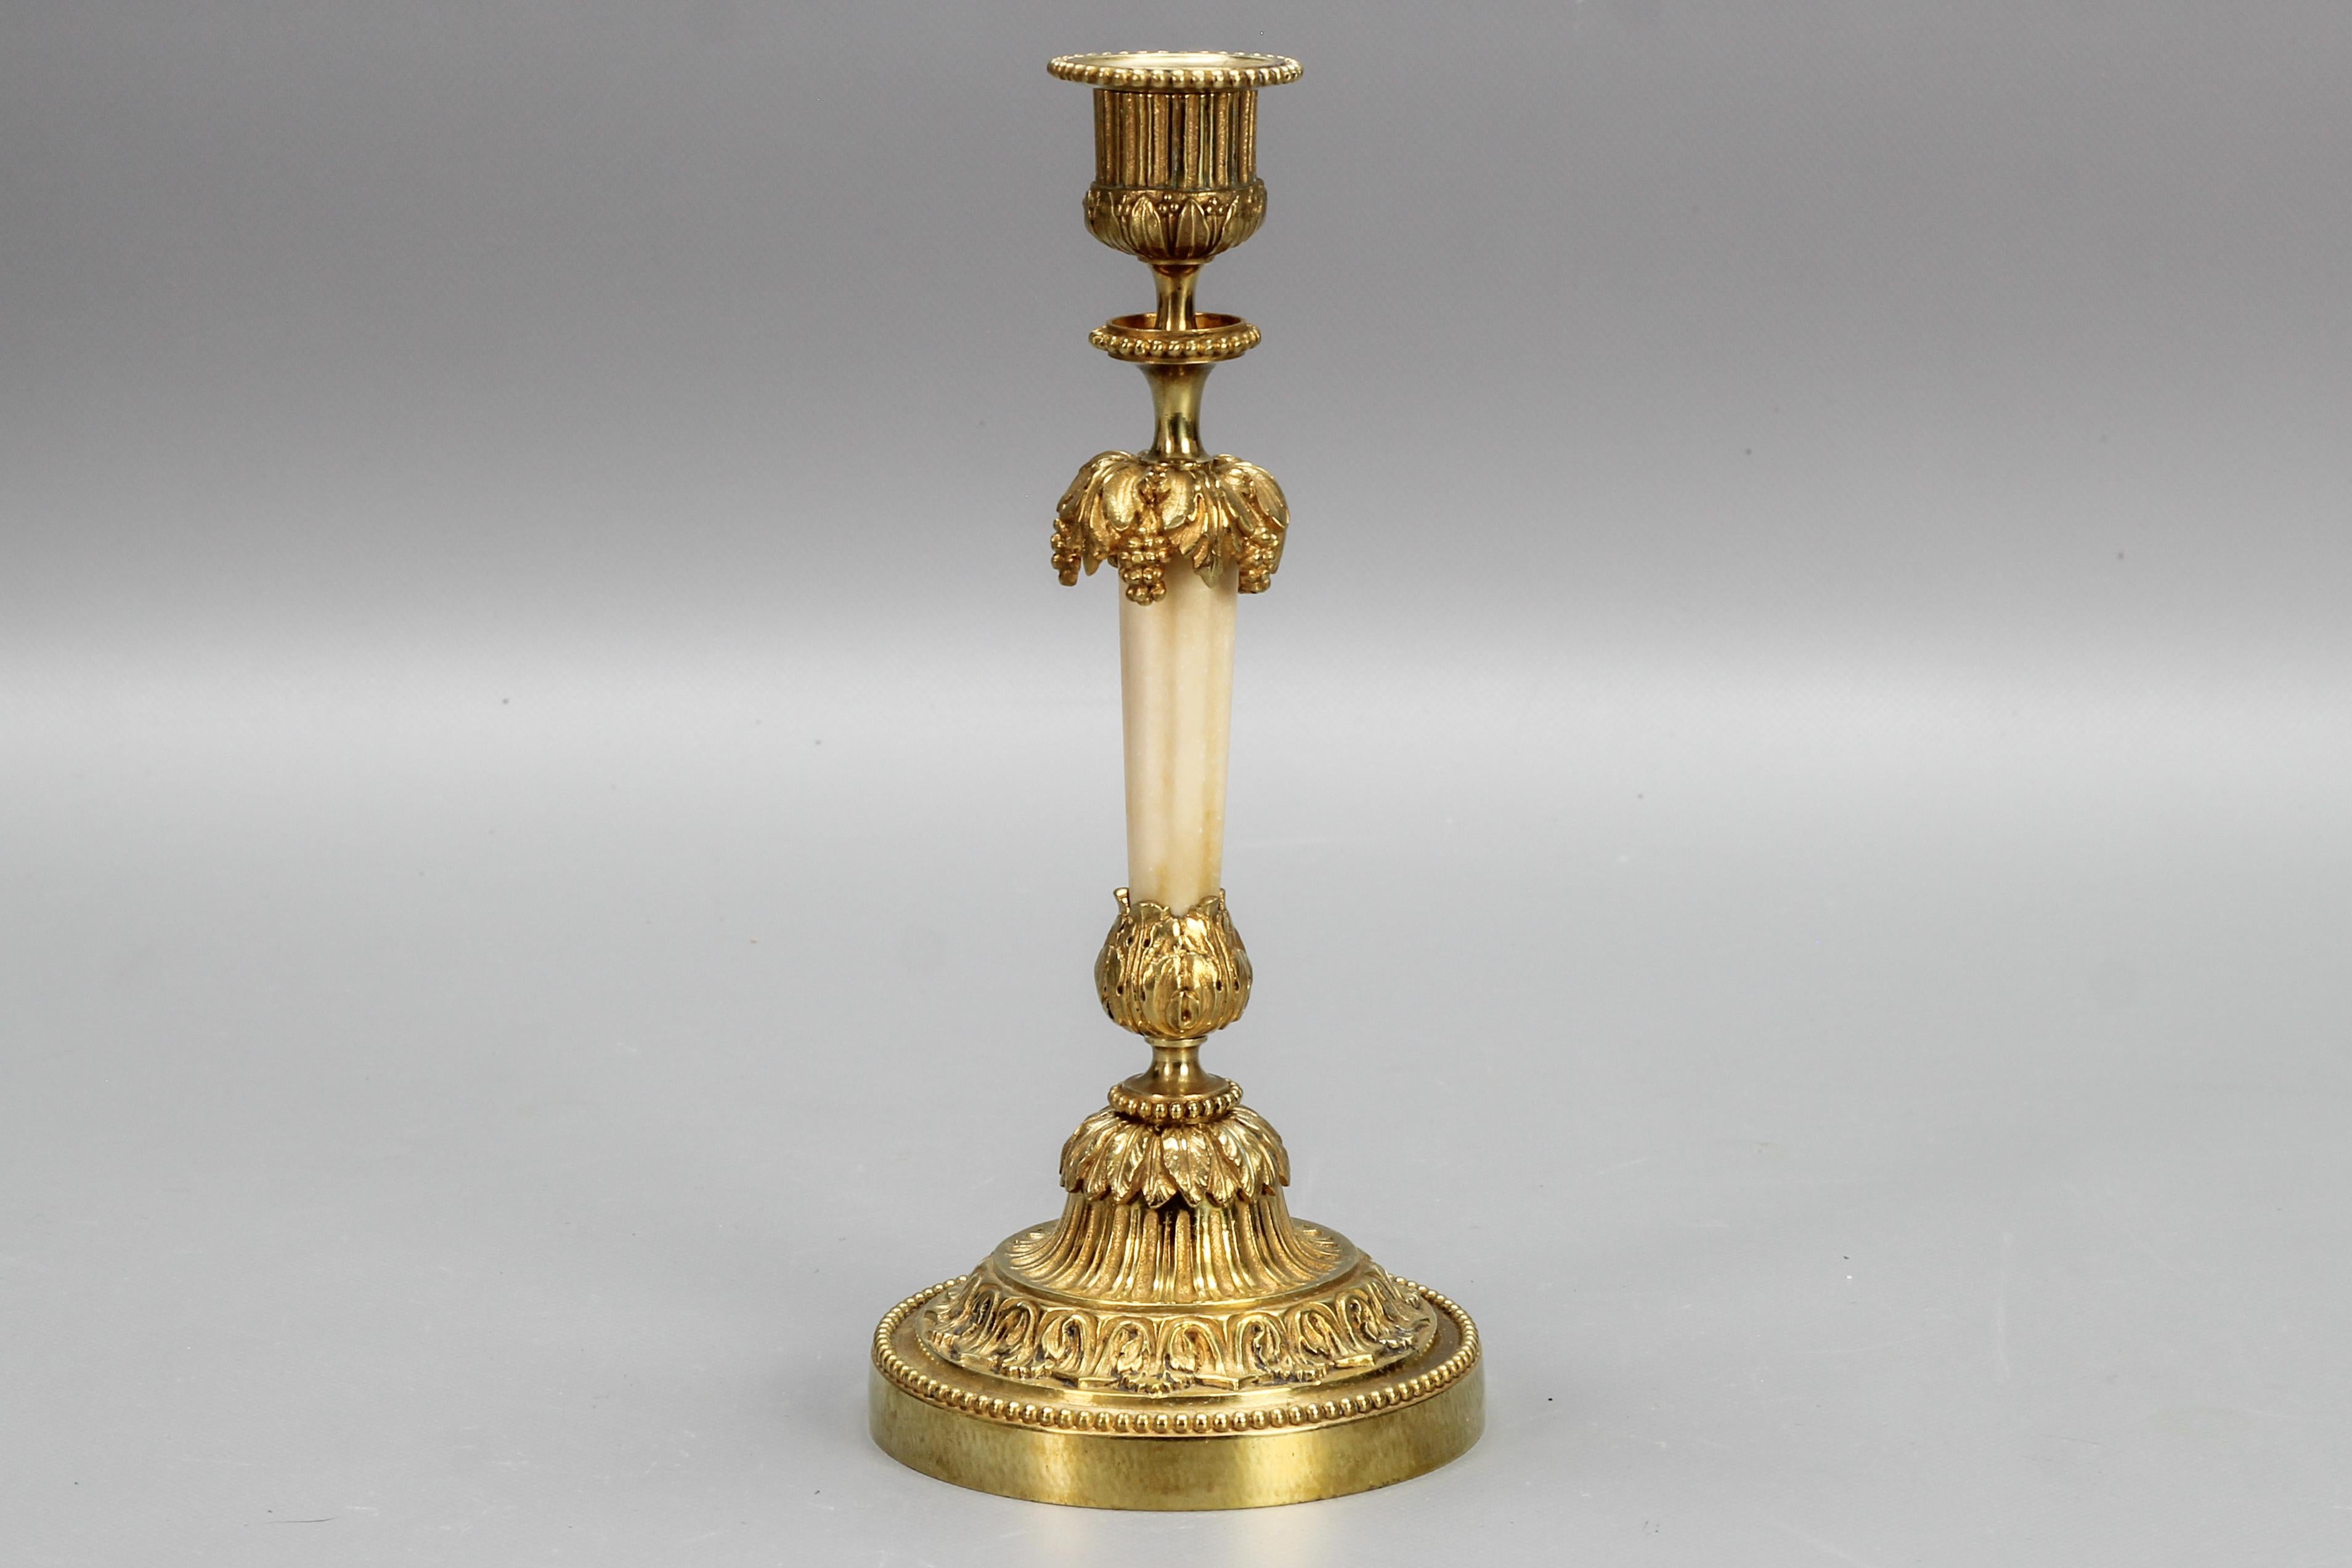 Late 19th Century French Louis XVI Style Bronze and White marble candlestick
An adorable French Louis XVI-style bronze candlestick or candle holder from the late 19th century. Beautifully ornate with foliate motifs throughout, with an original